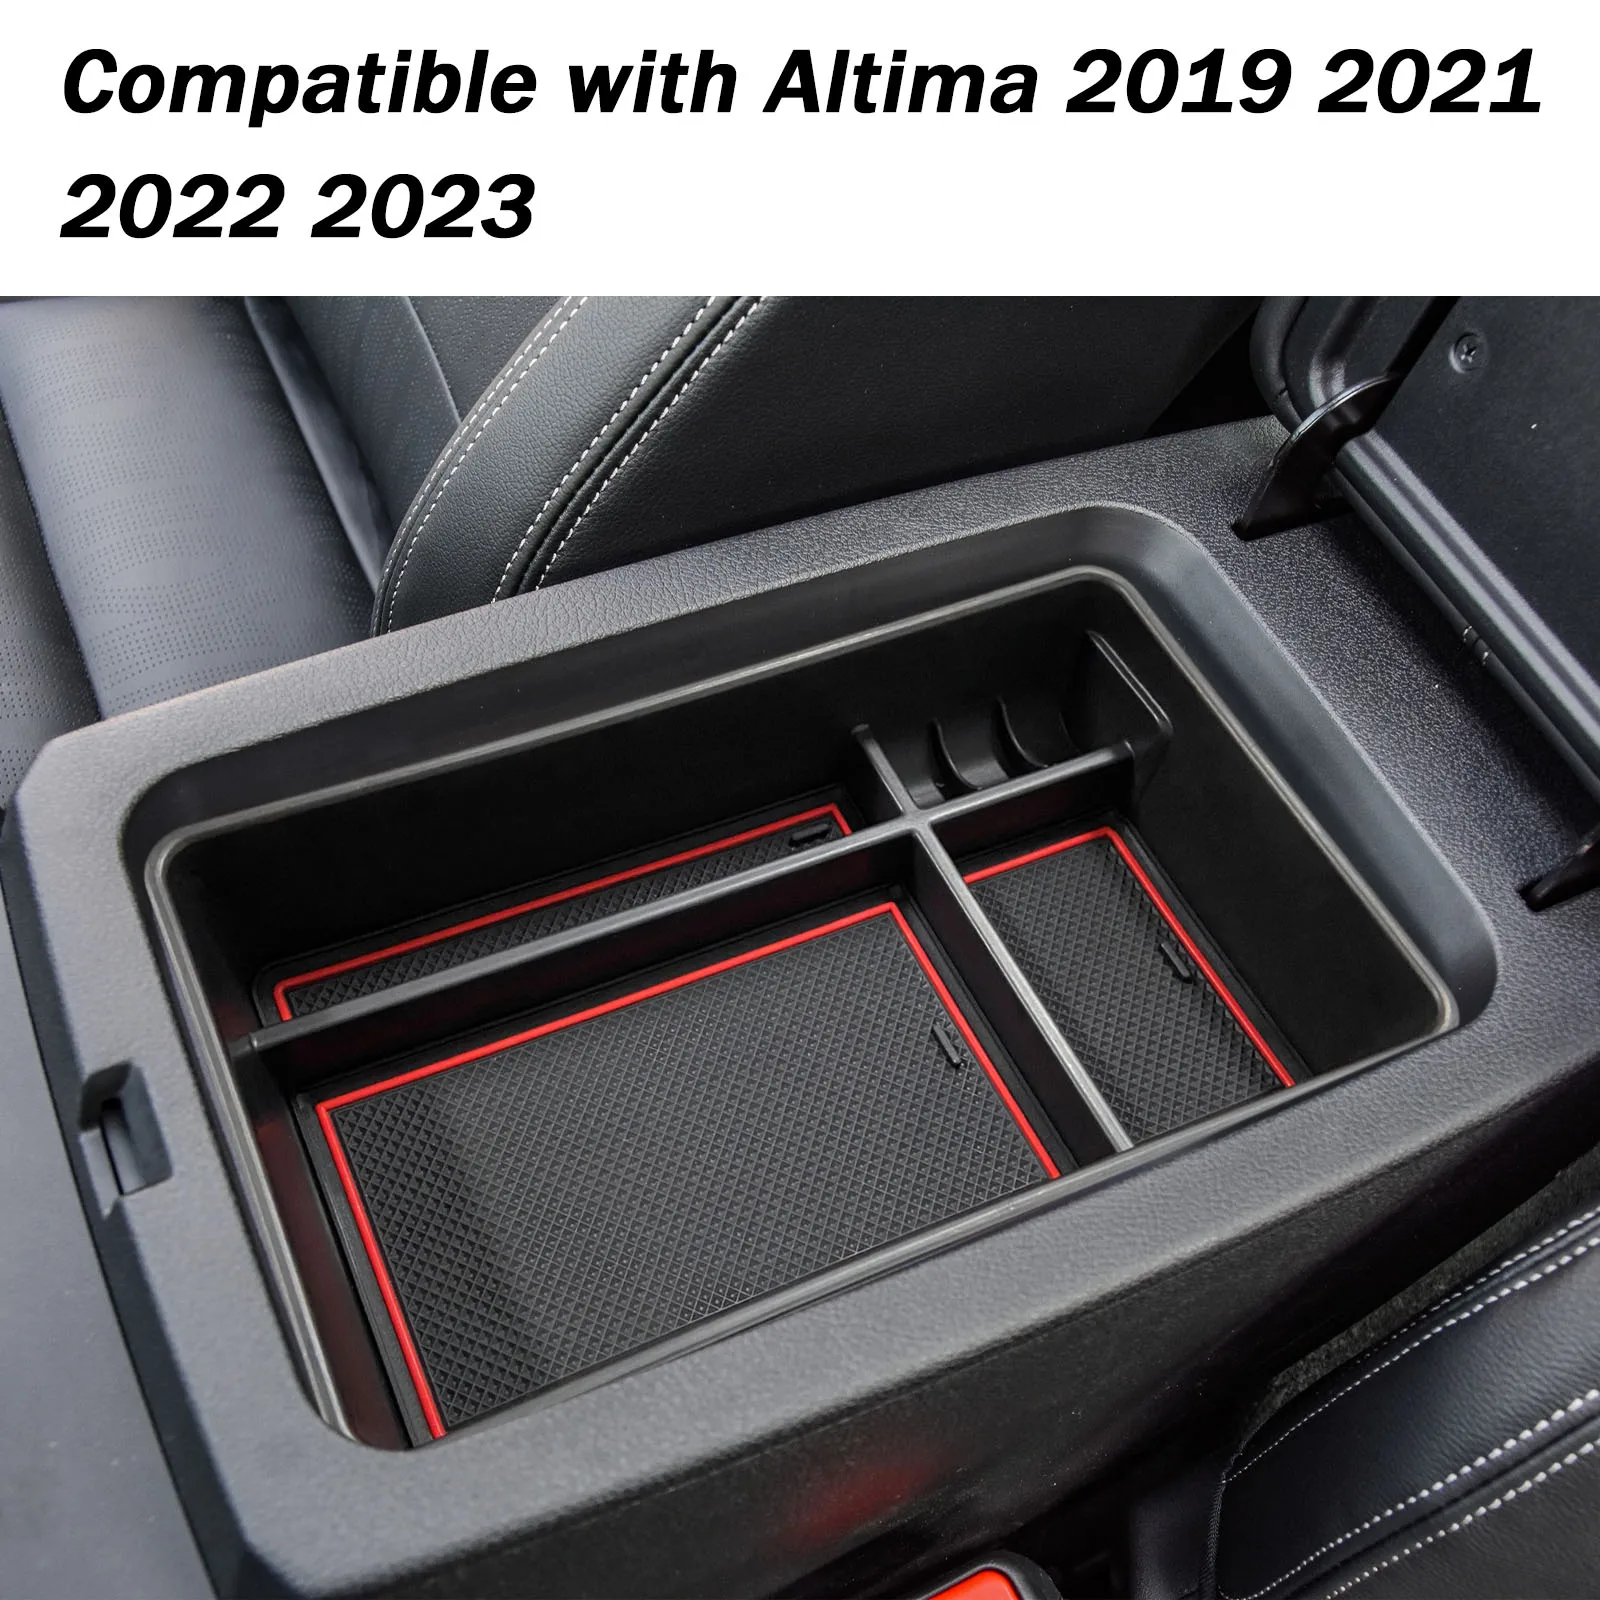 Center Console Tray Organizer For Nissan Altima 2019 2020 2021 2022 2023 Accessories Container Stowing Glove Box Pallet Holder for nissan altima 2019 2021 2022 2023 center console organizer armrest storage box car interior accessories